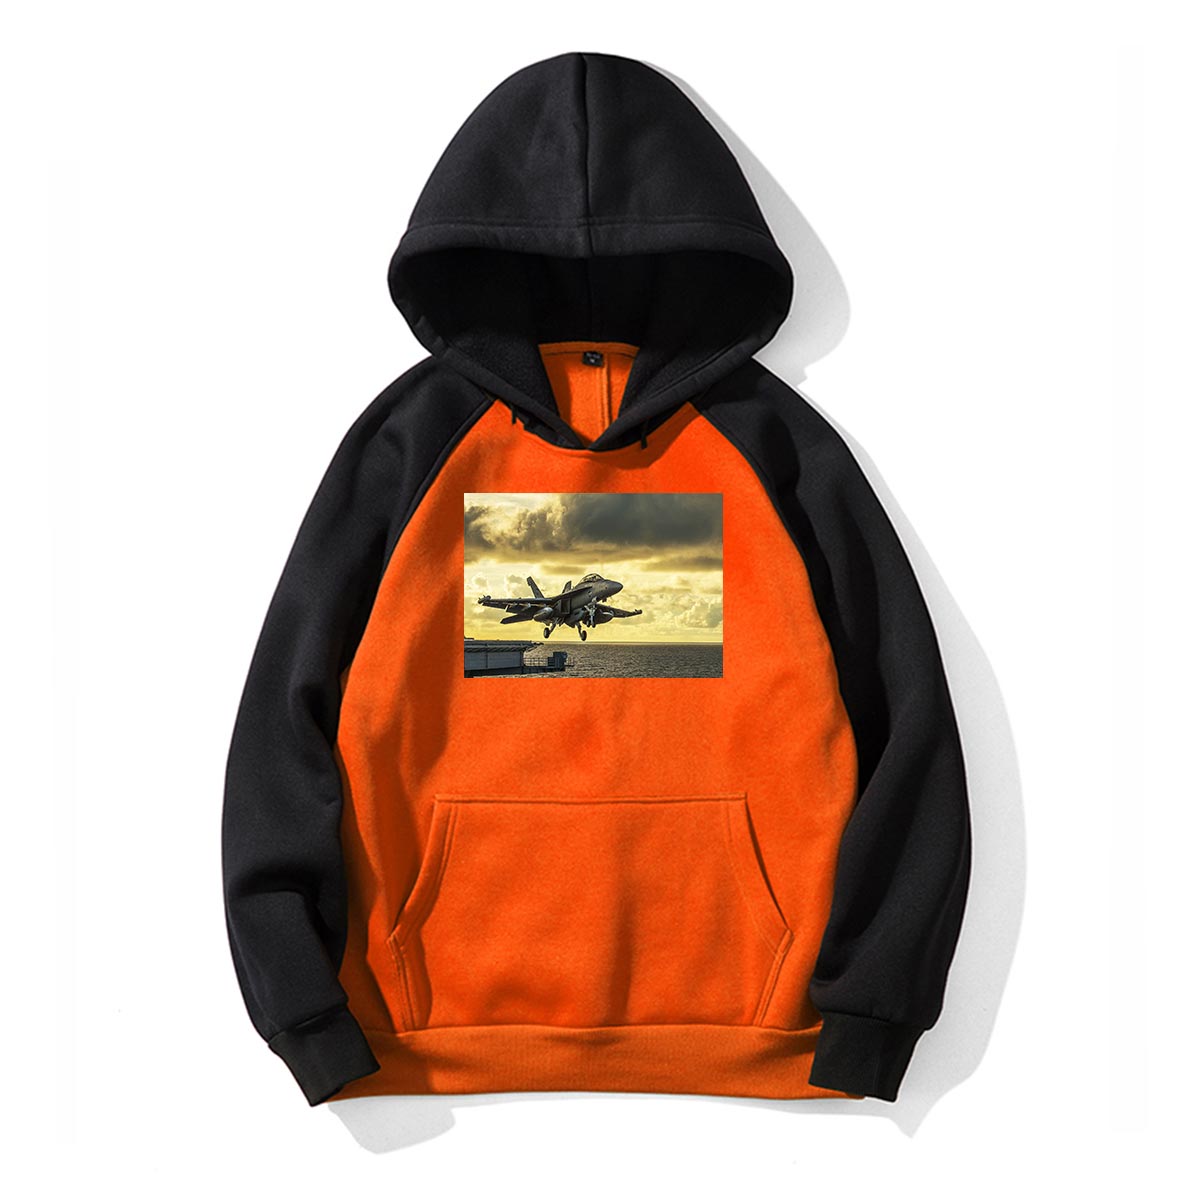 Departing Jet Aircraft Designed Colourful Hoodies